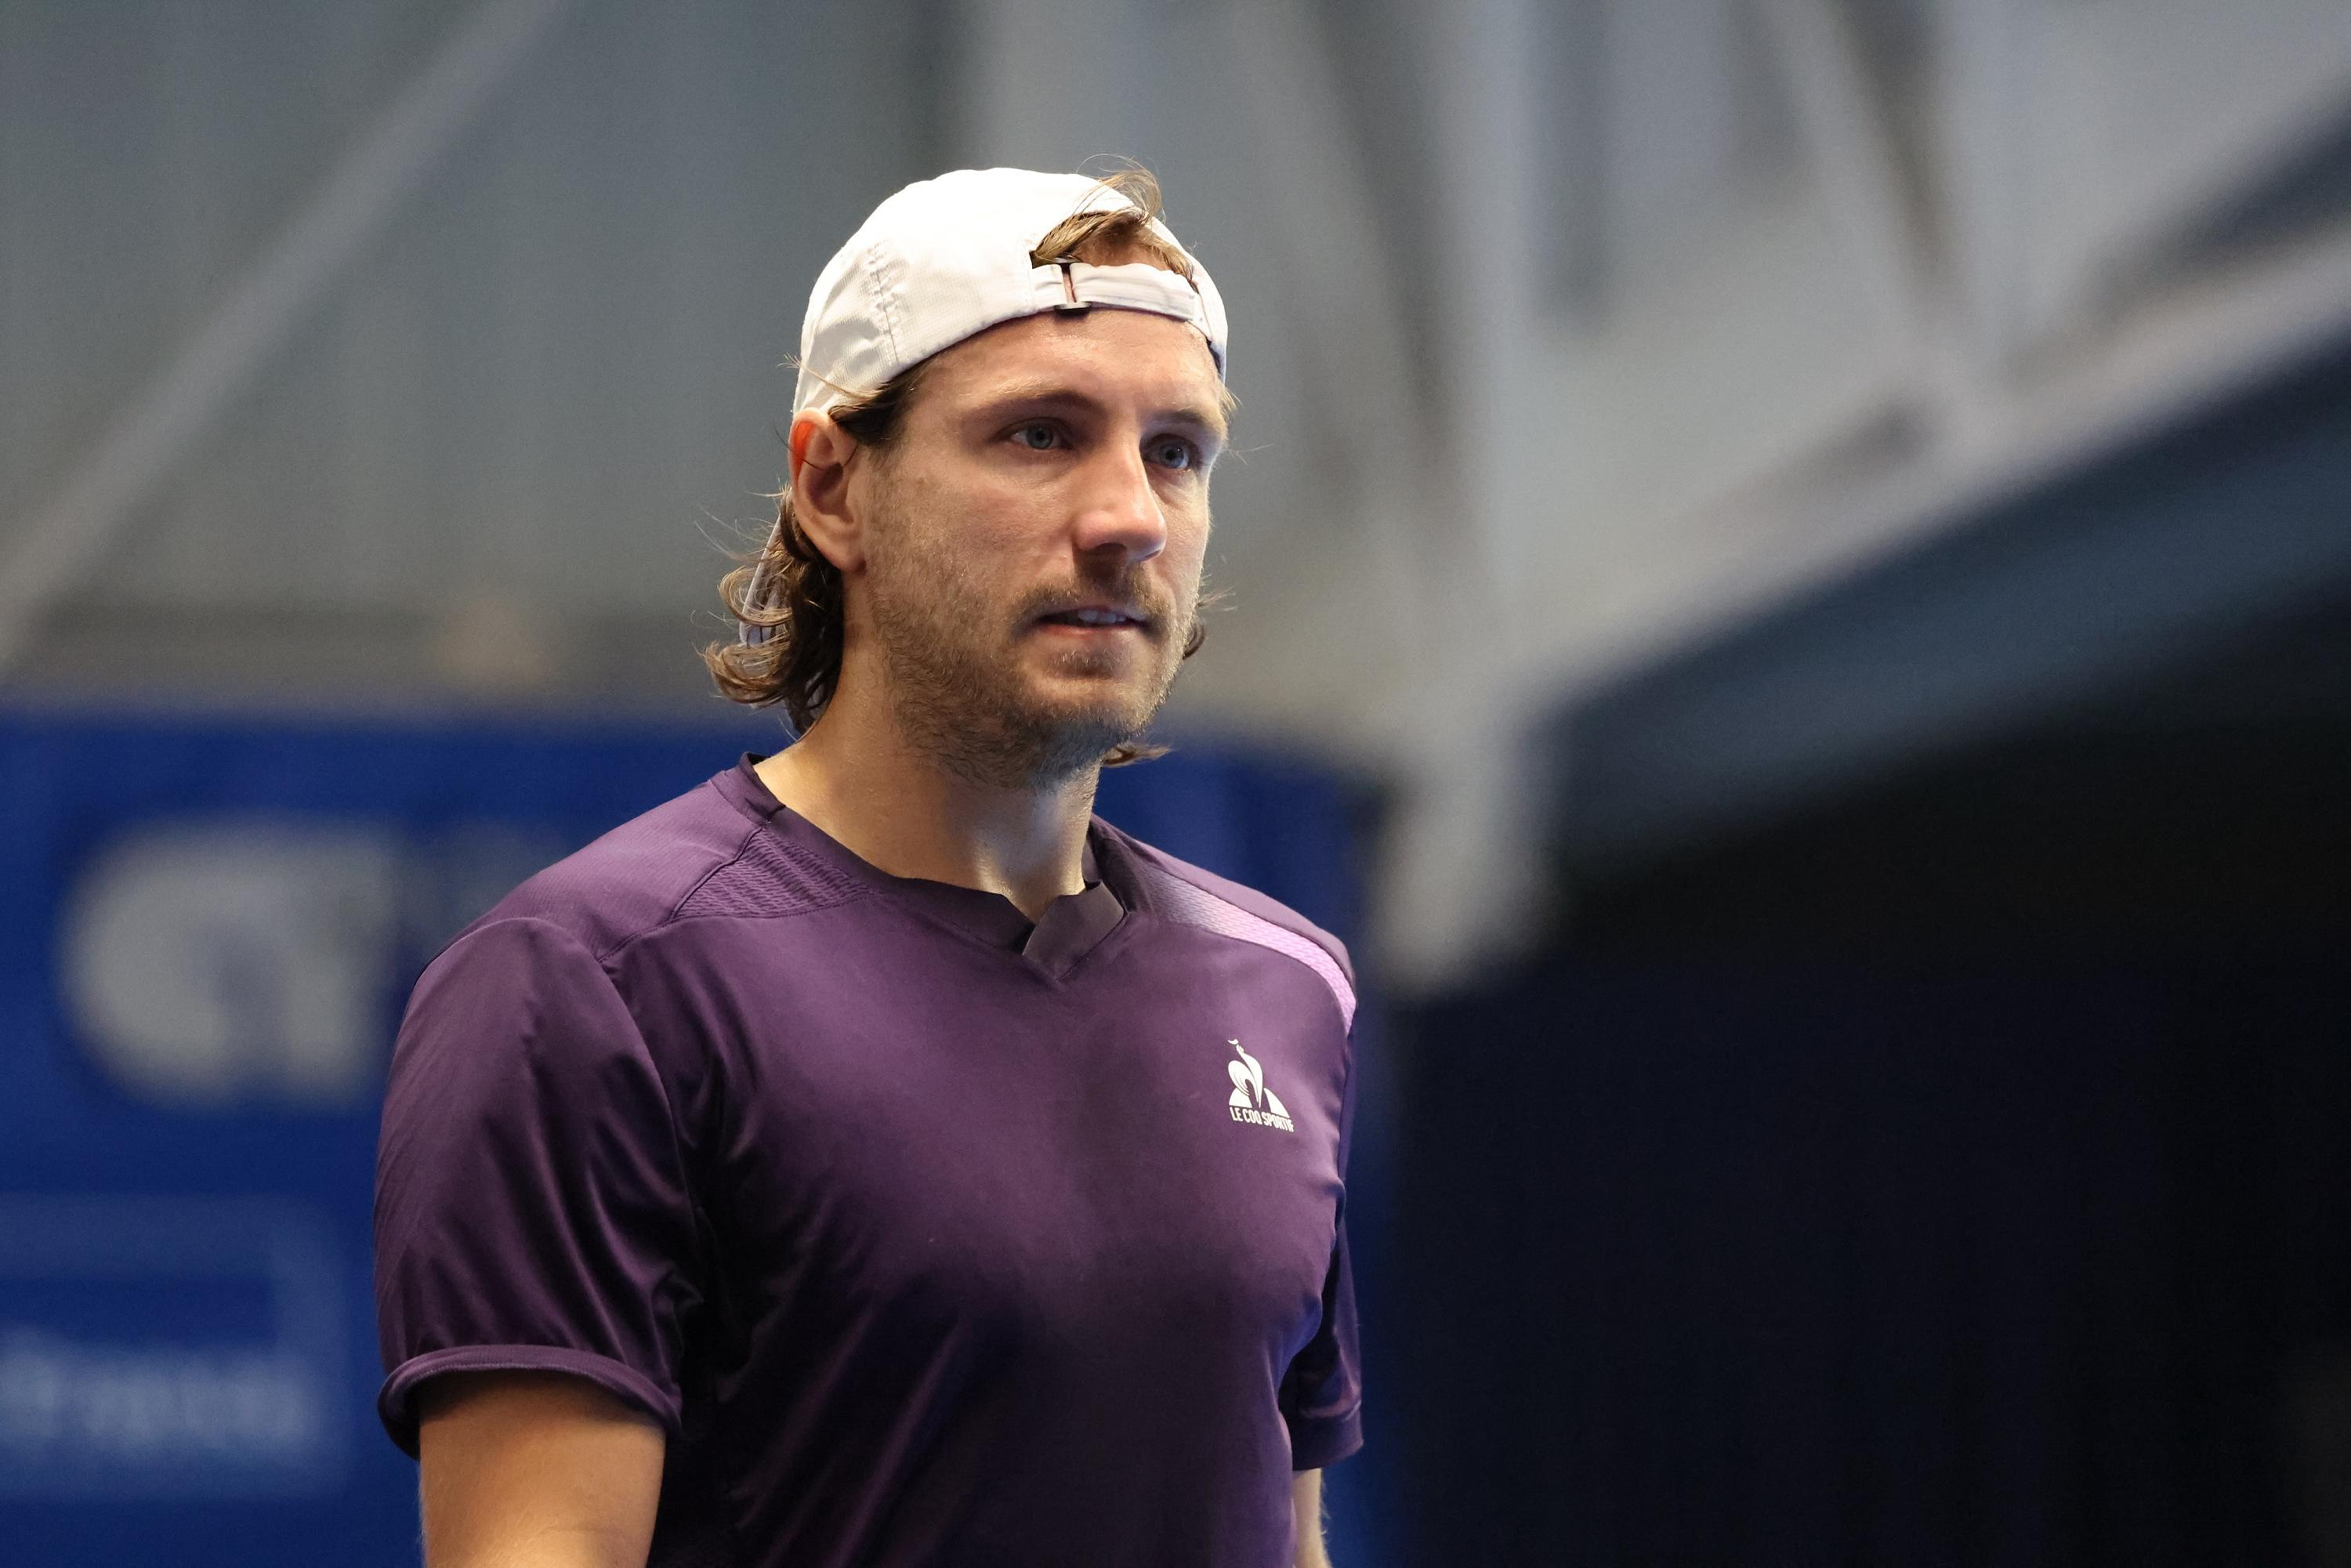 Tennis: Lucas Pouille qualifies for the big draw at Indian Wells